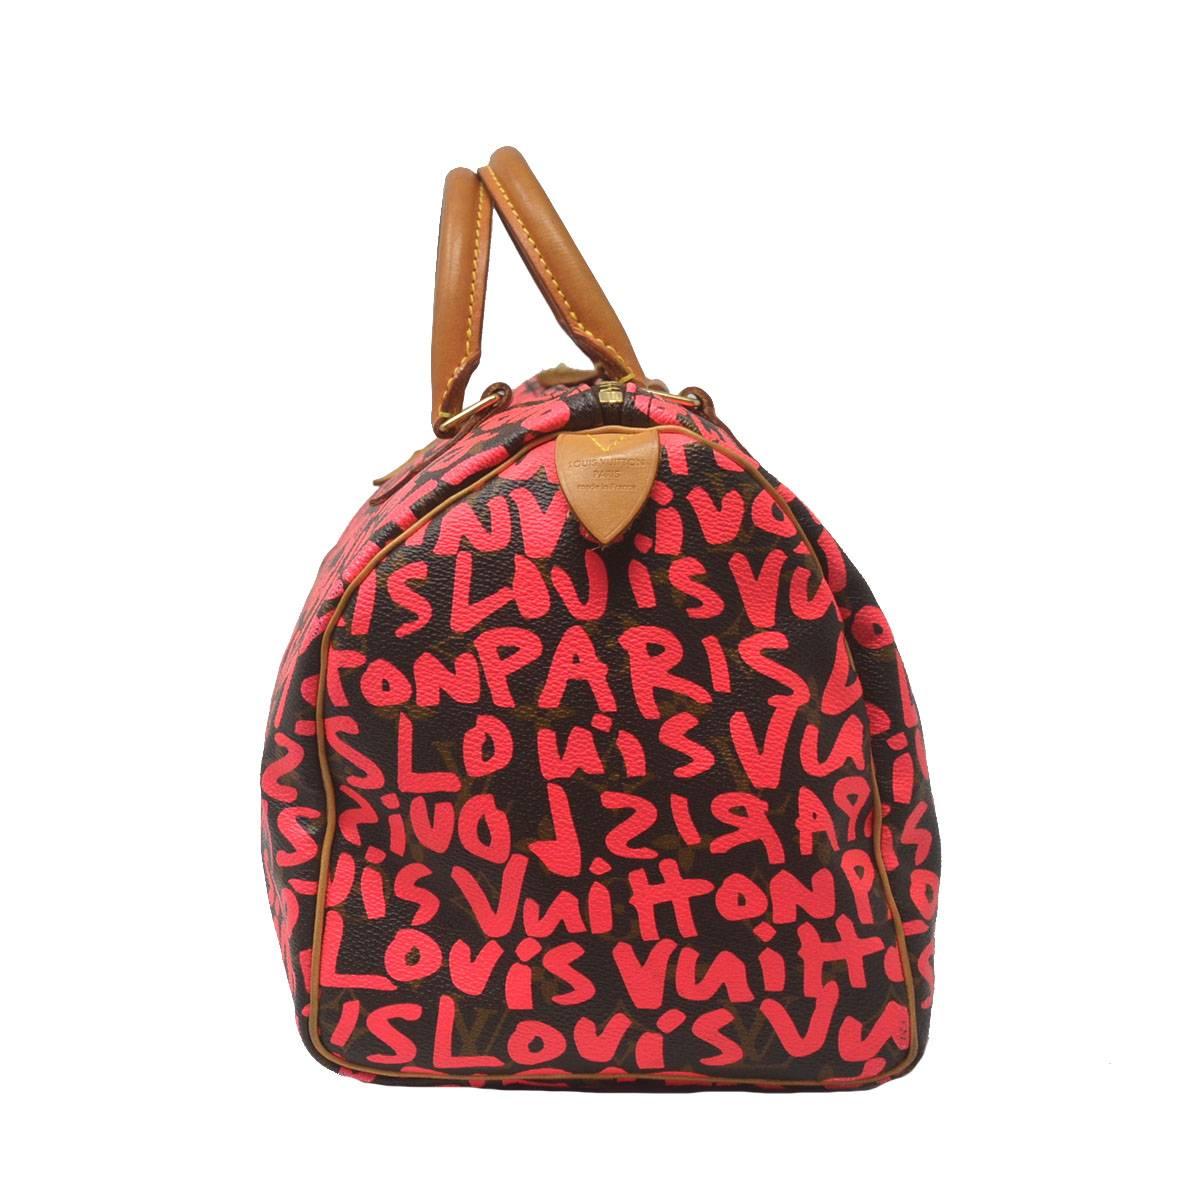 Company-Louis Vuitton
Model-Speedy 30 Stephen Sprouse Graffiti
Color-Neon Pink
Date Code-TH5008
Material-Leather
Measurements-11.8